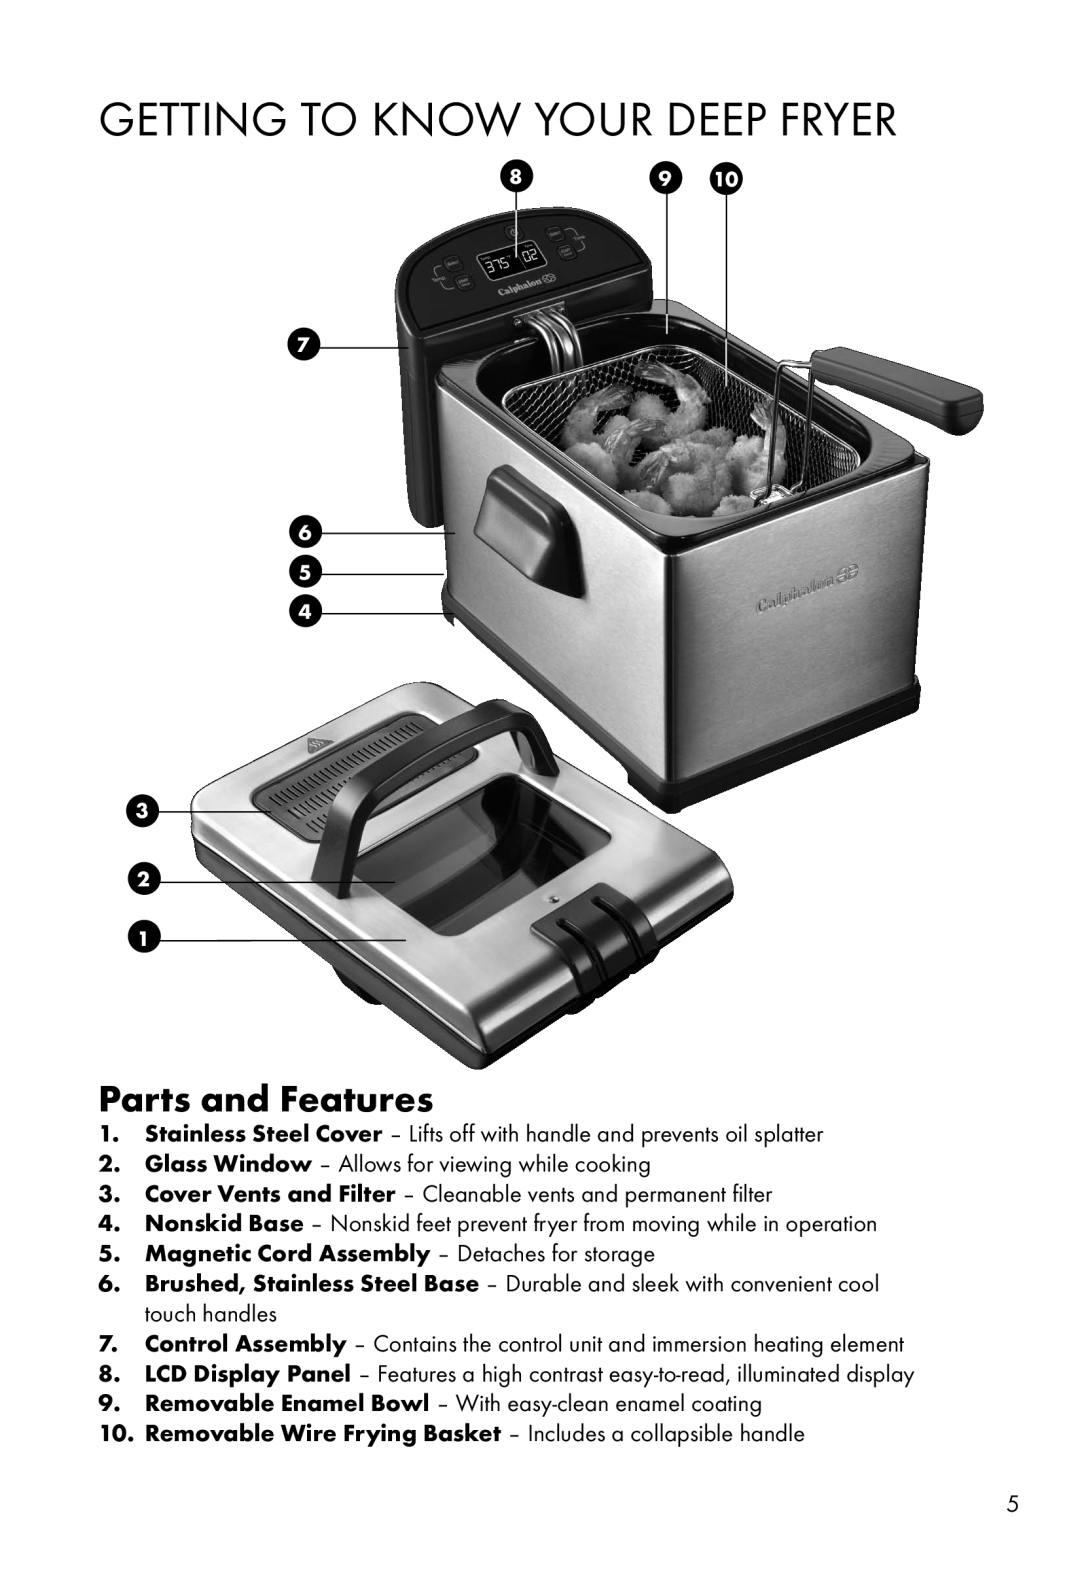 Calphalon HE380DF manual Getting To Know Your Deep Fryer, Parts and Features, Magnetic Cord Assembly - Detaches for storage 